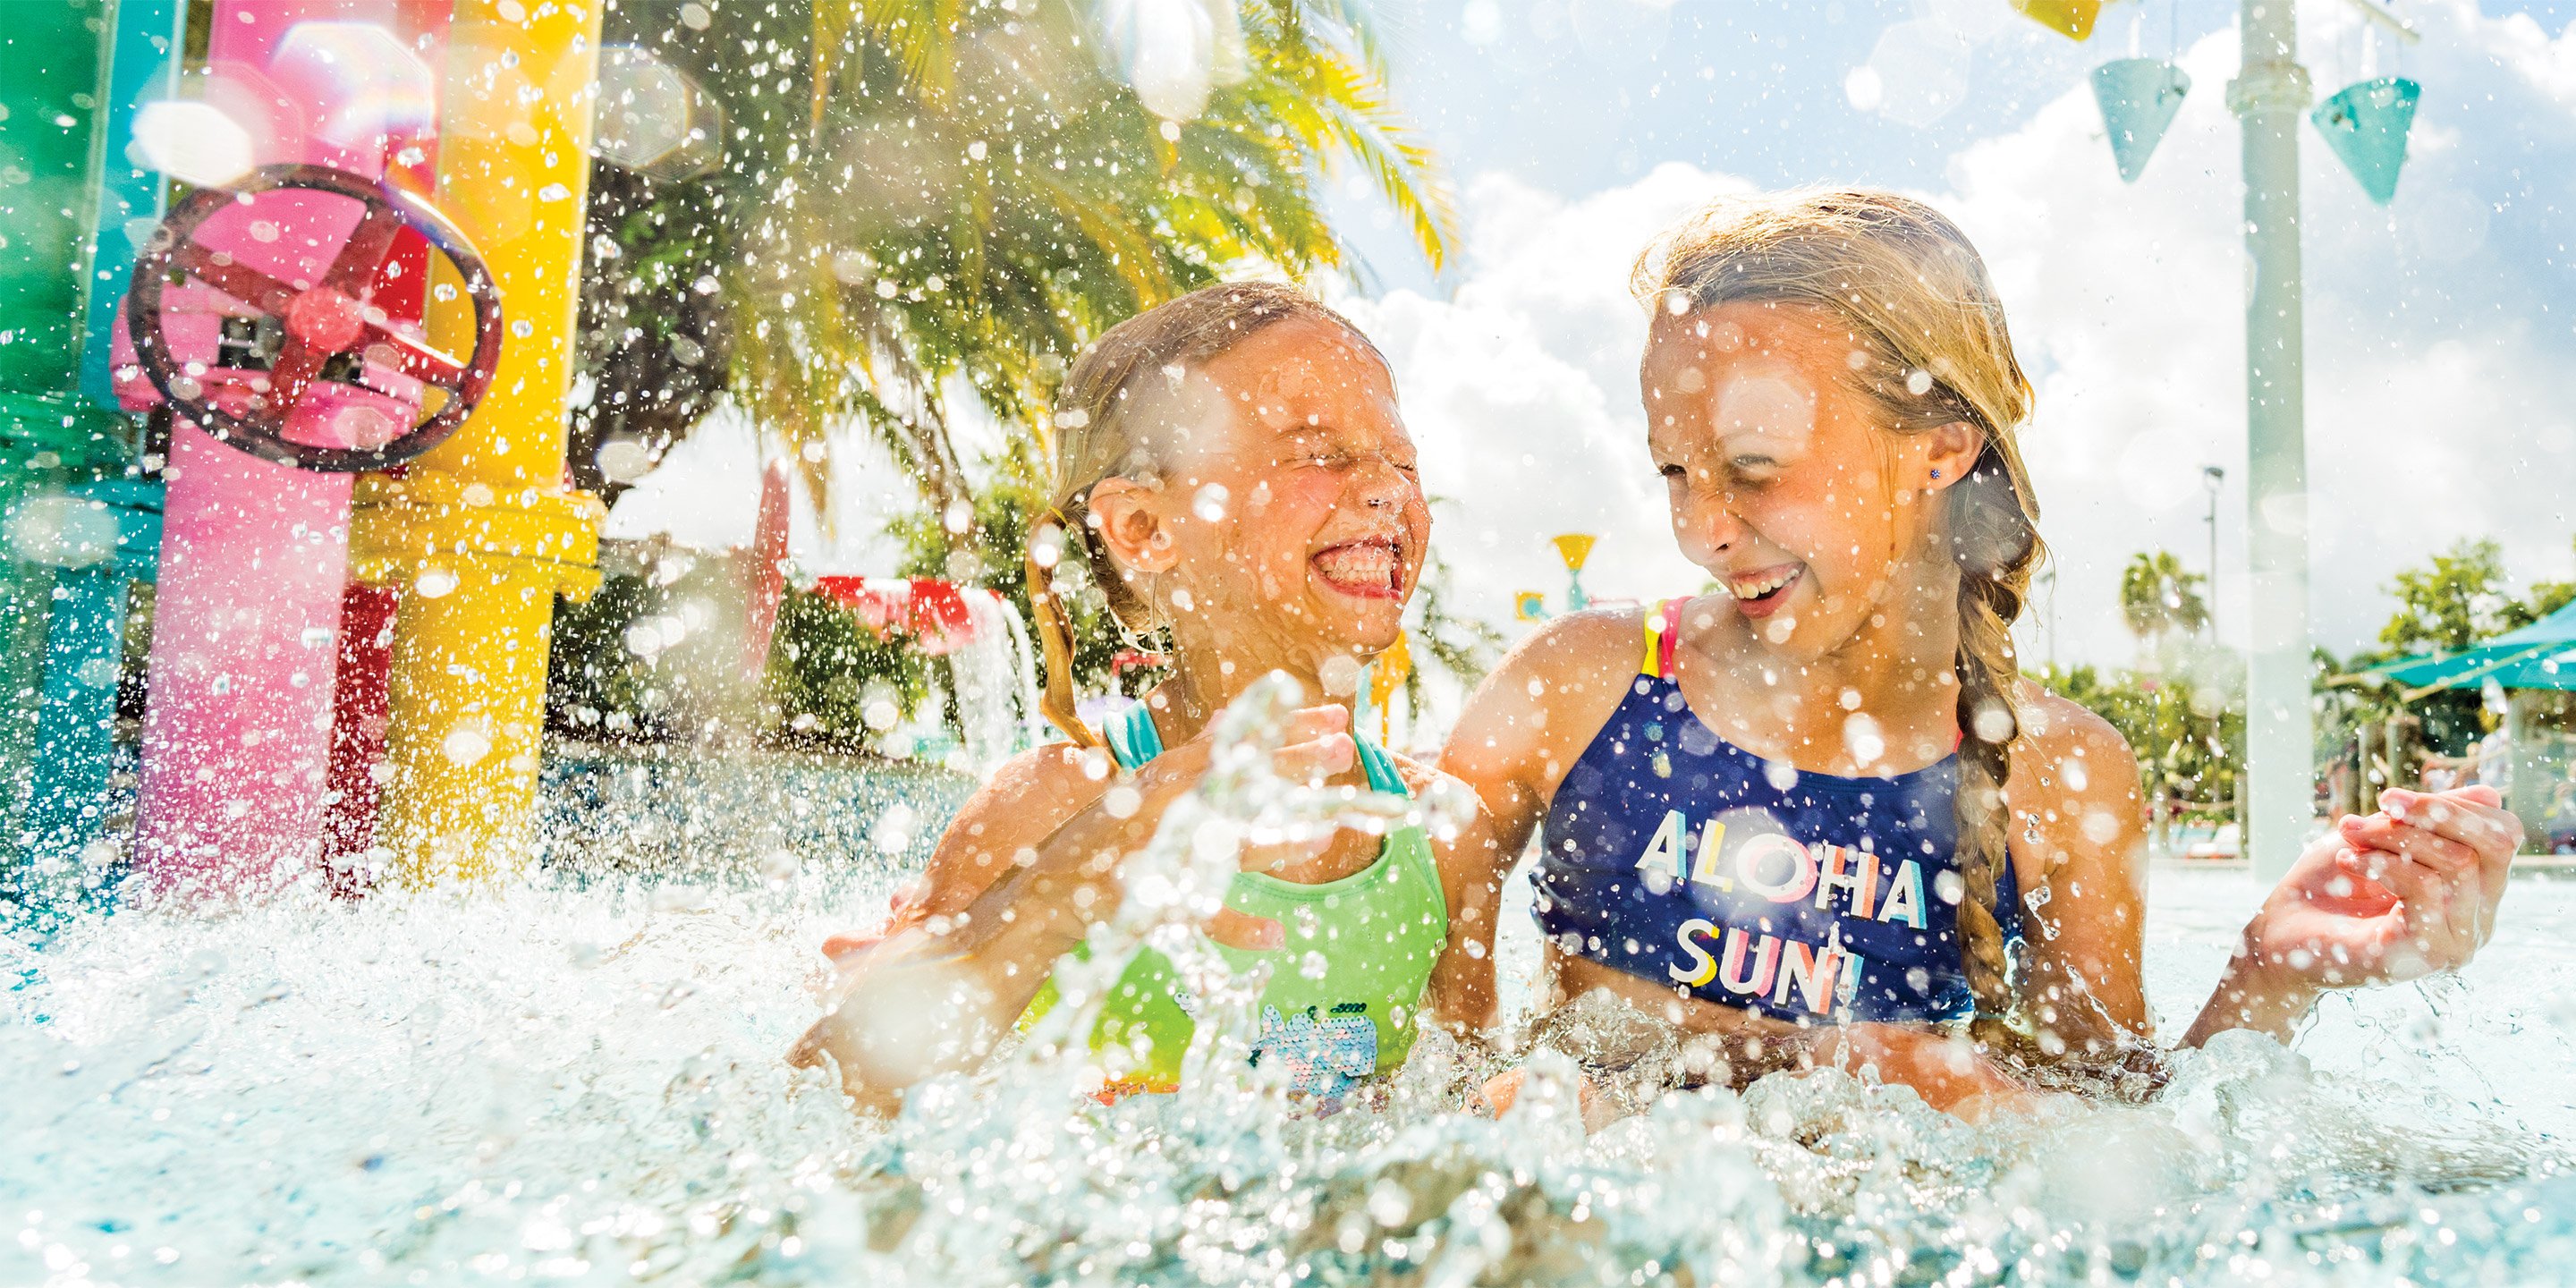 Two young girls laughing and splashing in a pool